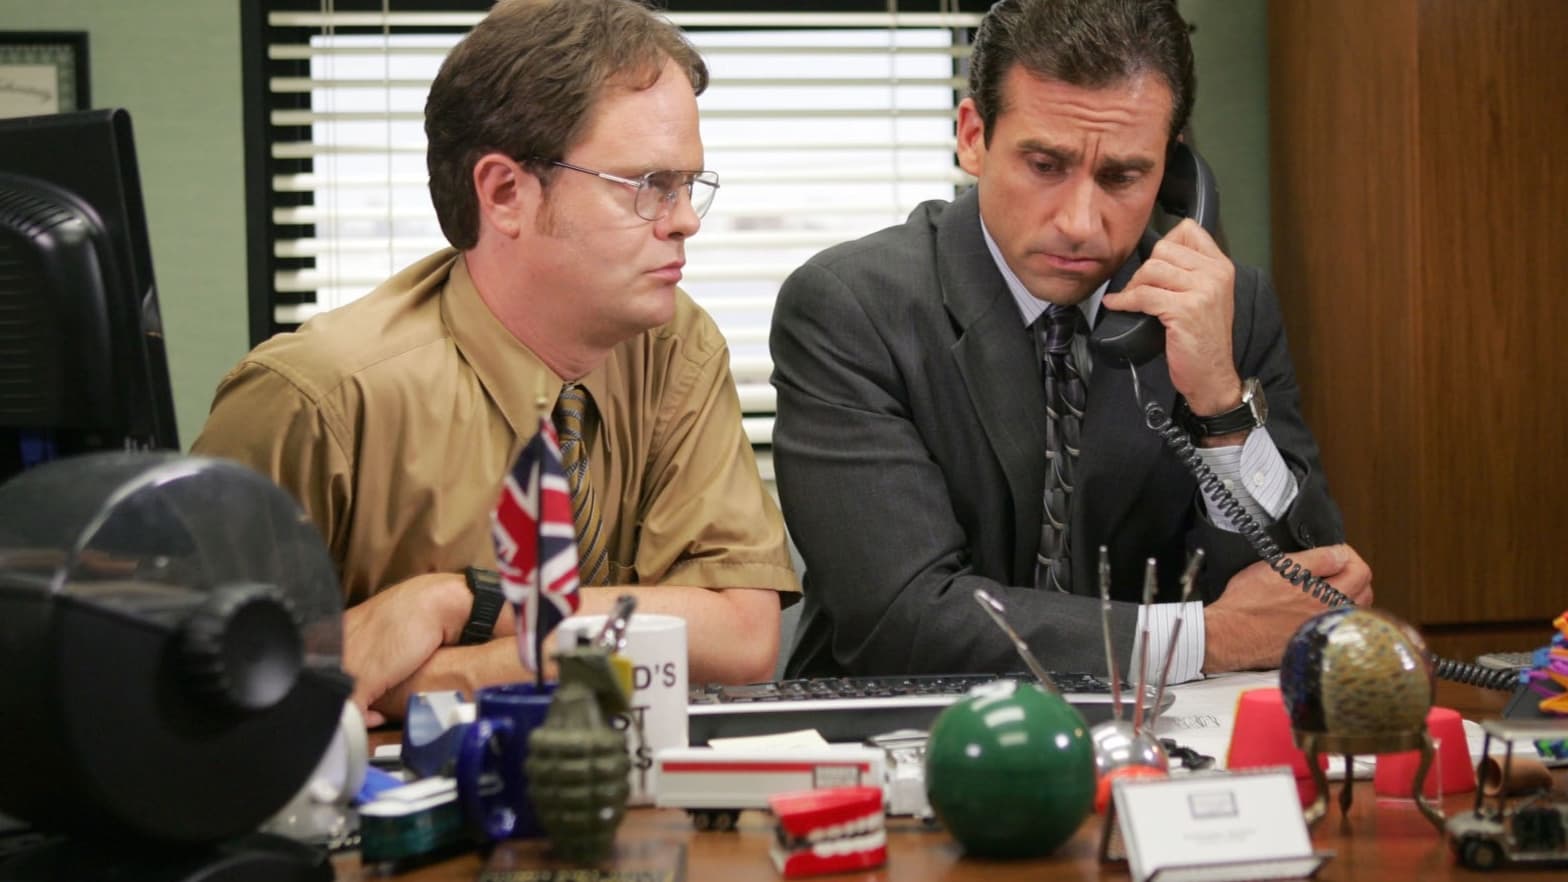 Amazon is preparing a remake of The Office movie in Australia